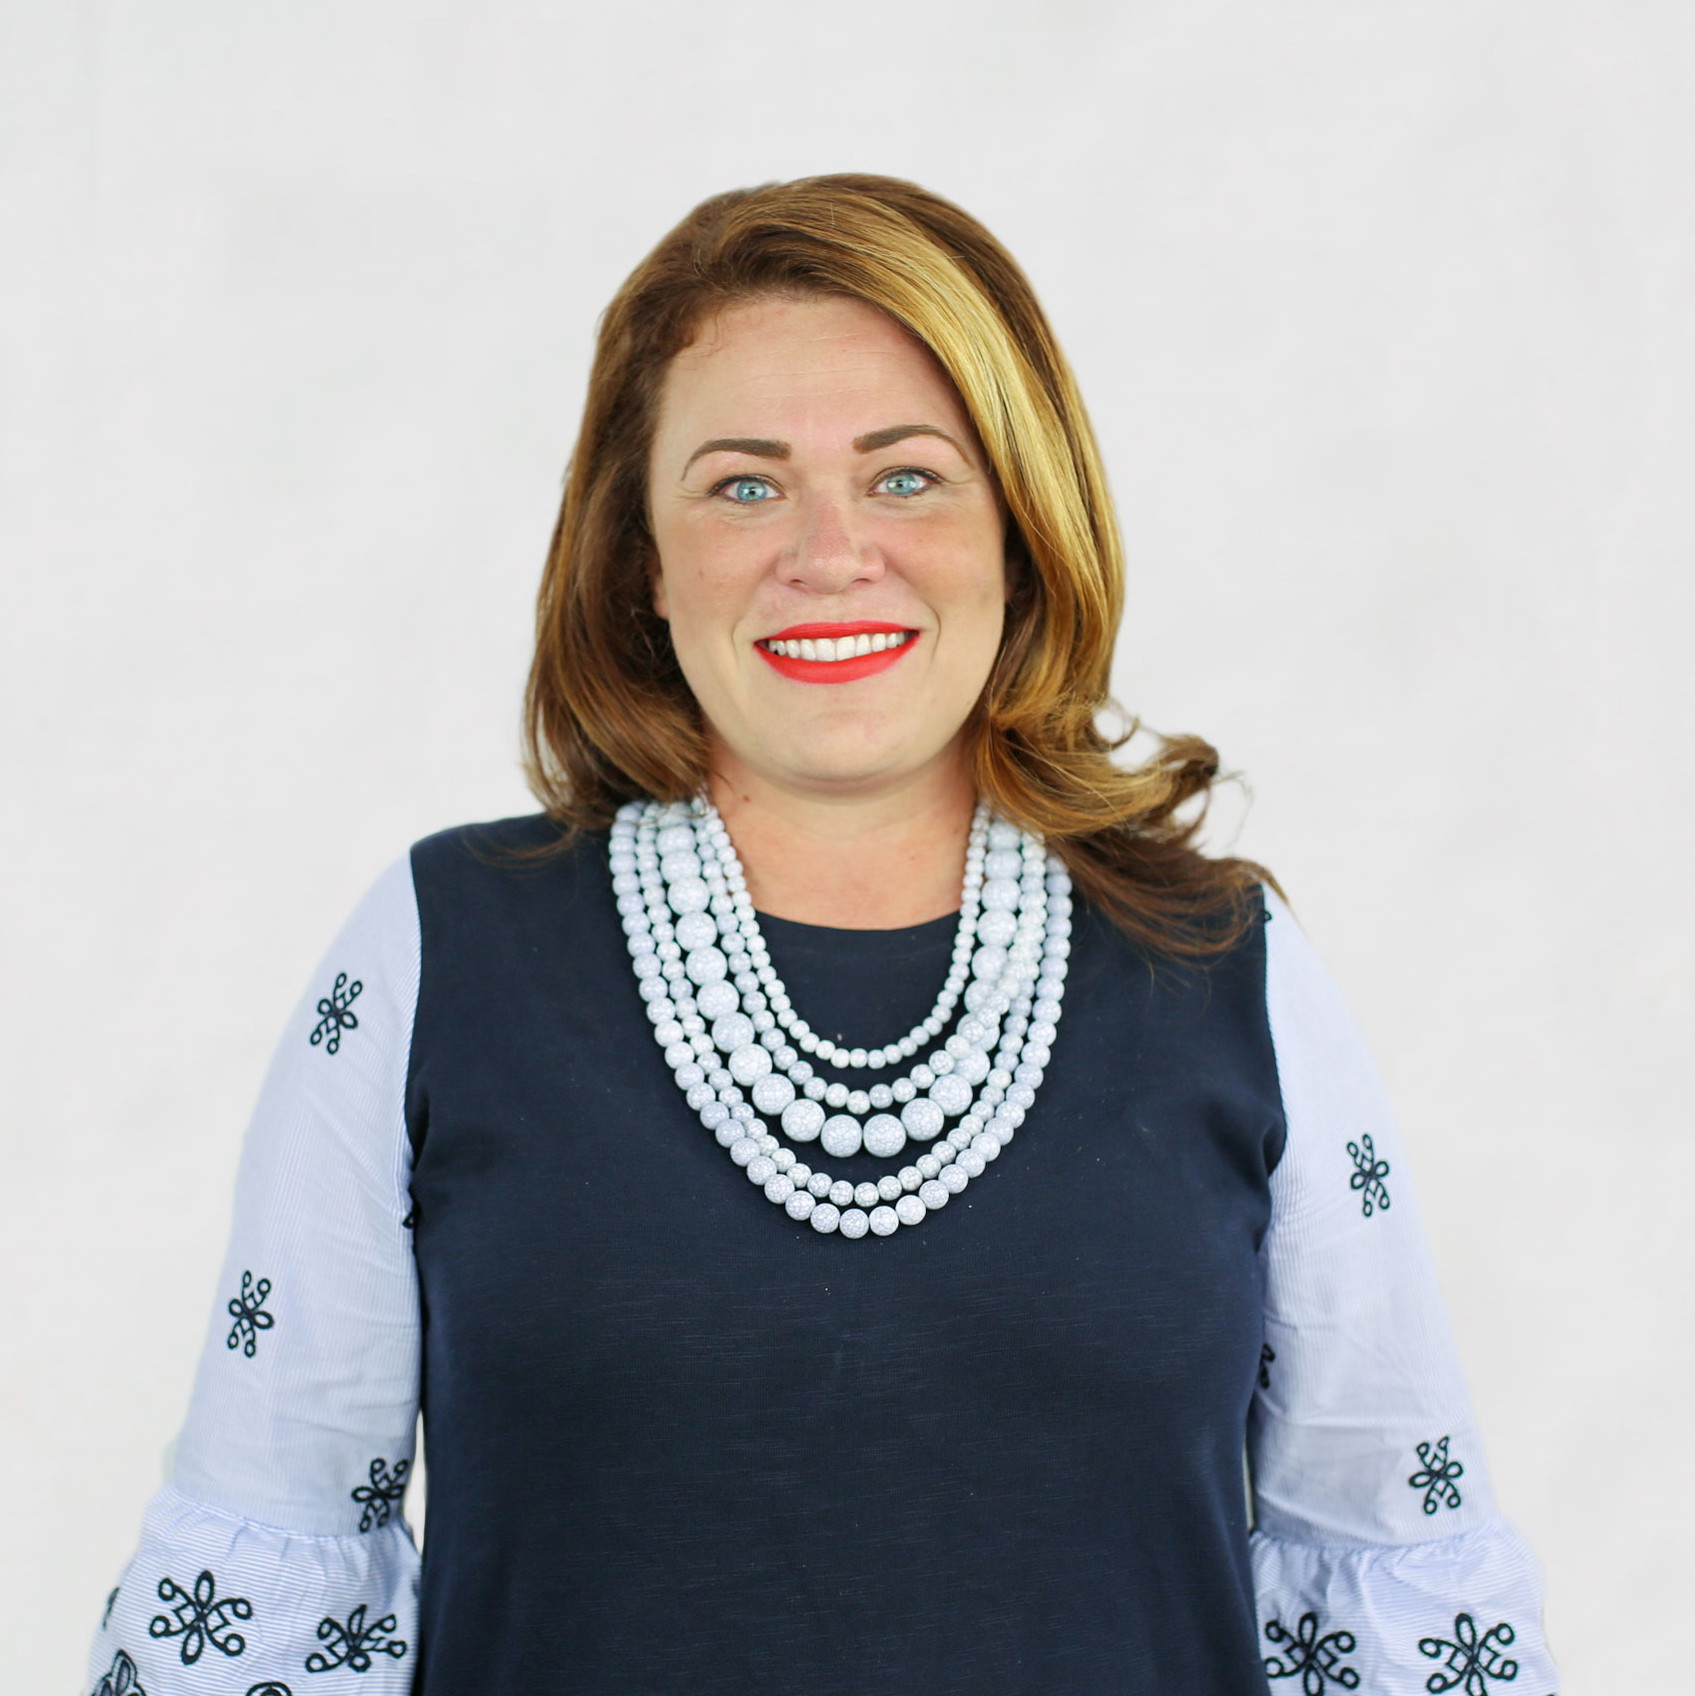 Sarah Dohl in a light blue and dark blue top with necklace